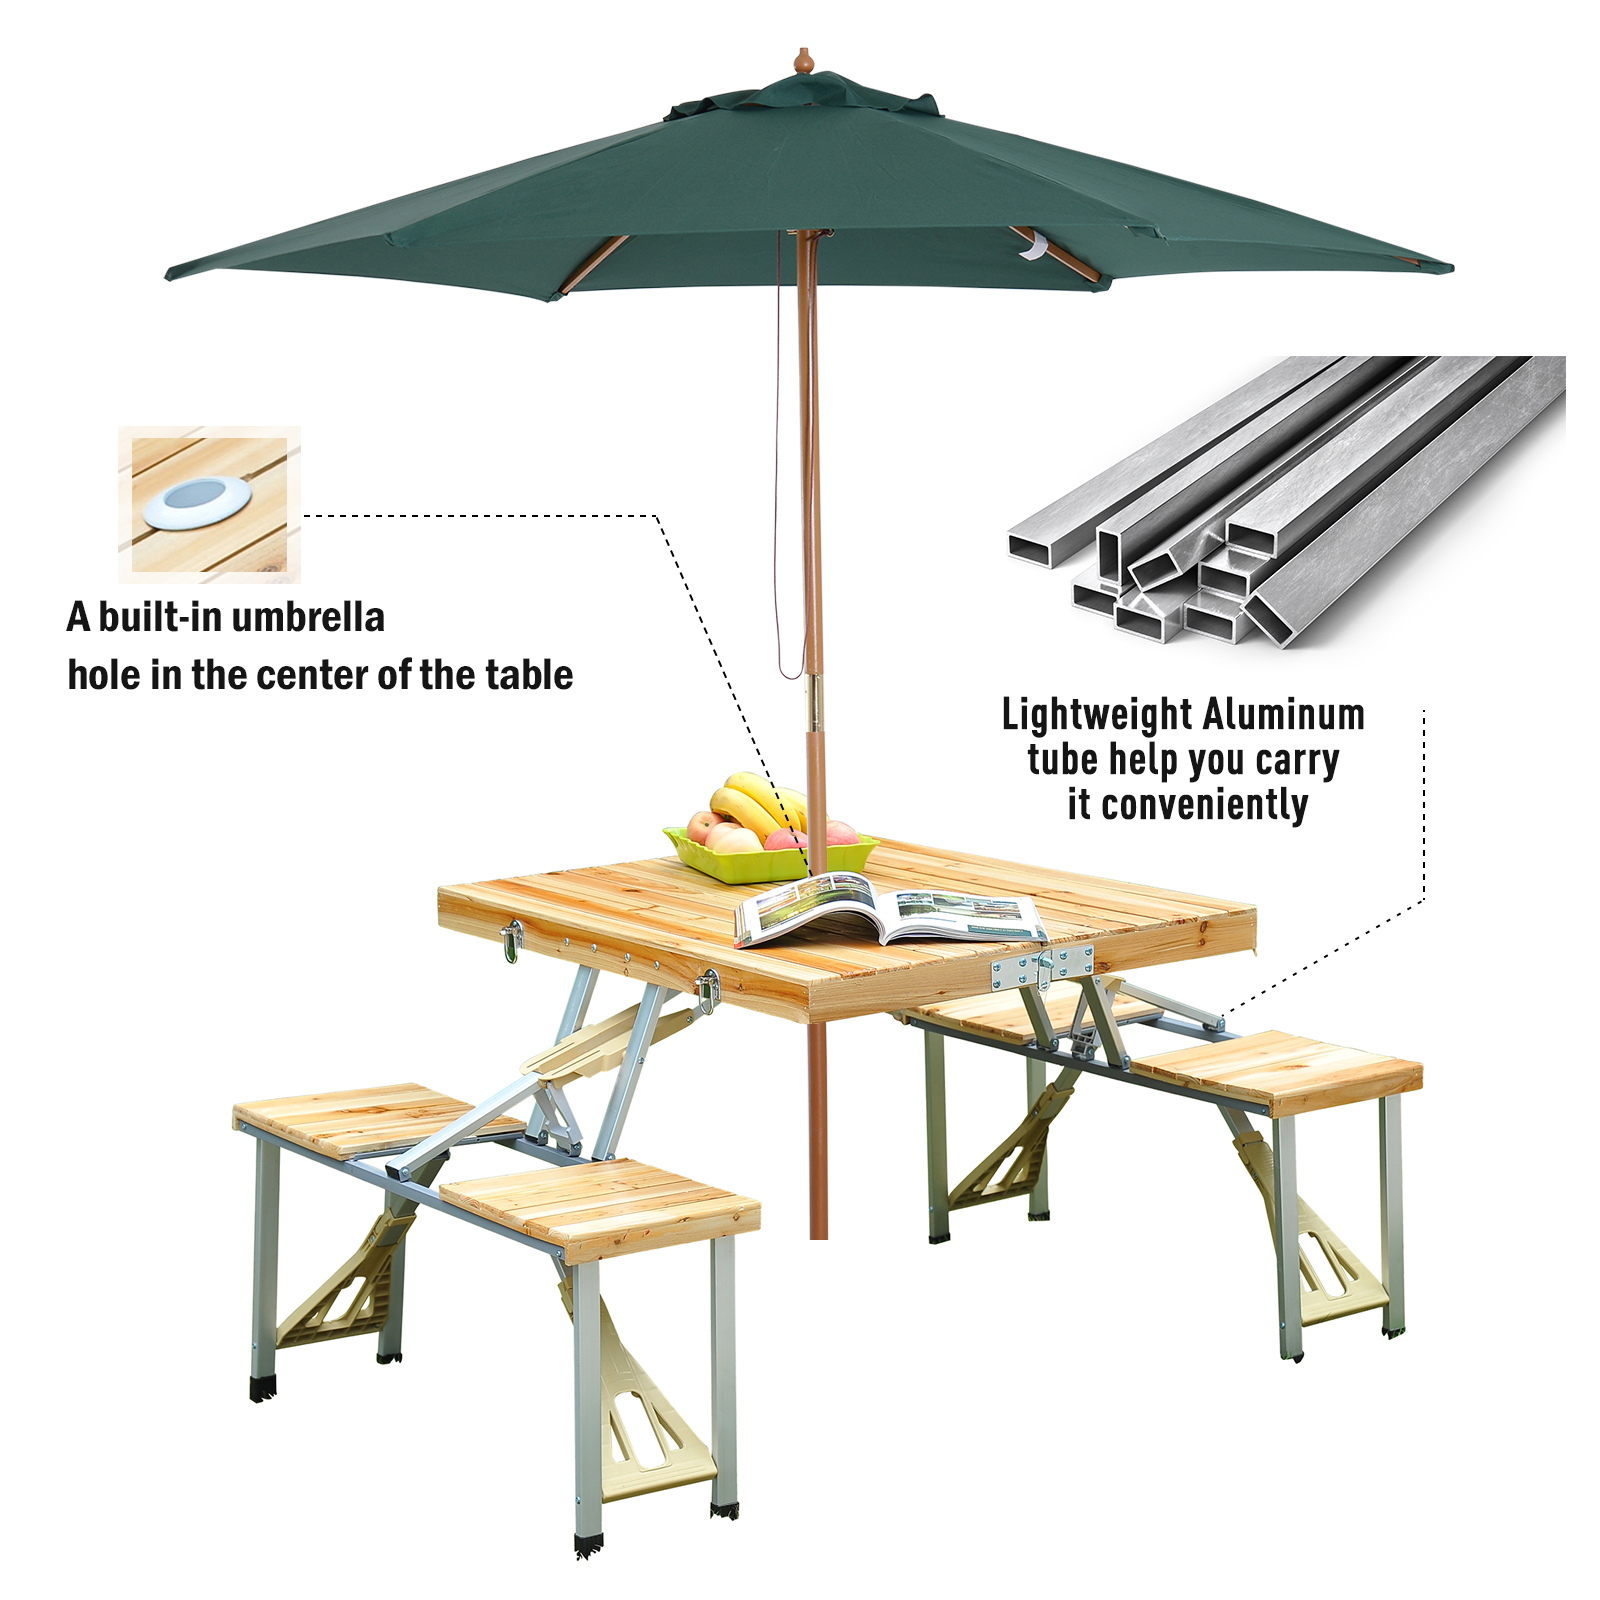 Outsunny Portable Picnic Table Set, Folding Camping Table with Four Chairs and Umbrella Hole, 4-Seats Aluminum Camping Chair with Table, Natural Wood - image 4 of 9